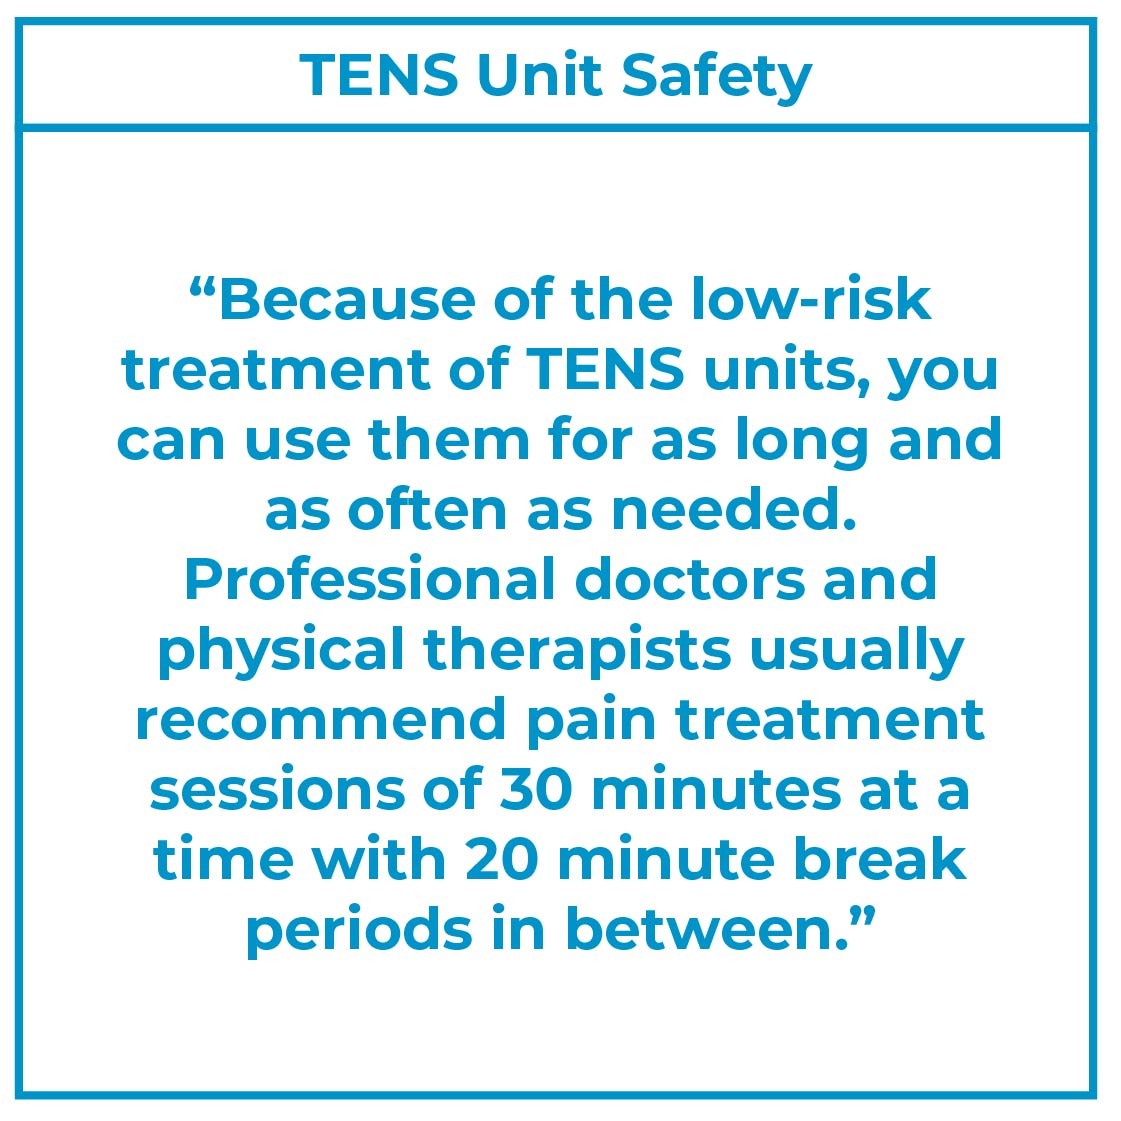 TENS Unit Safety